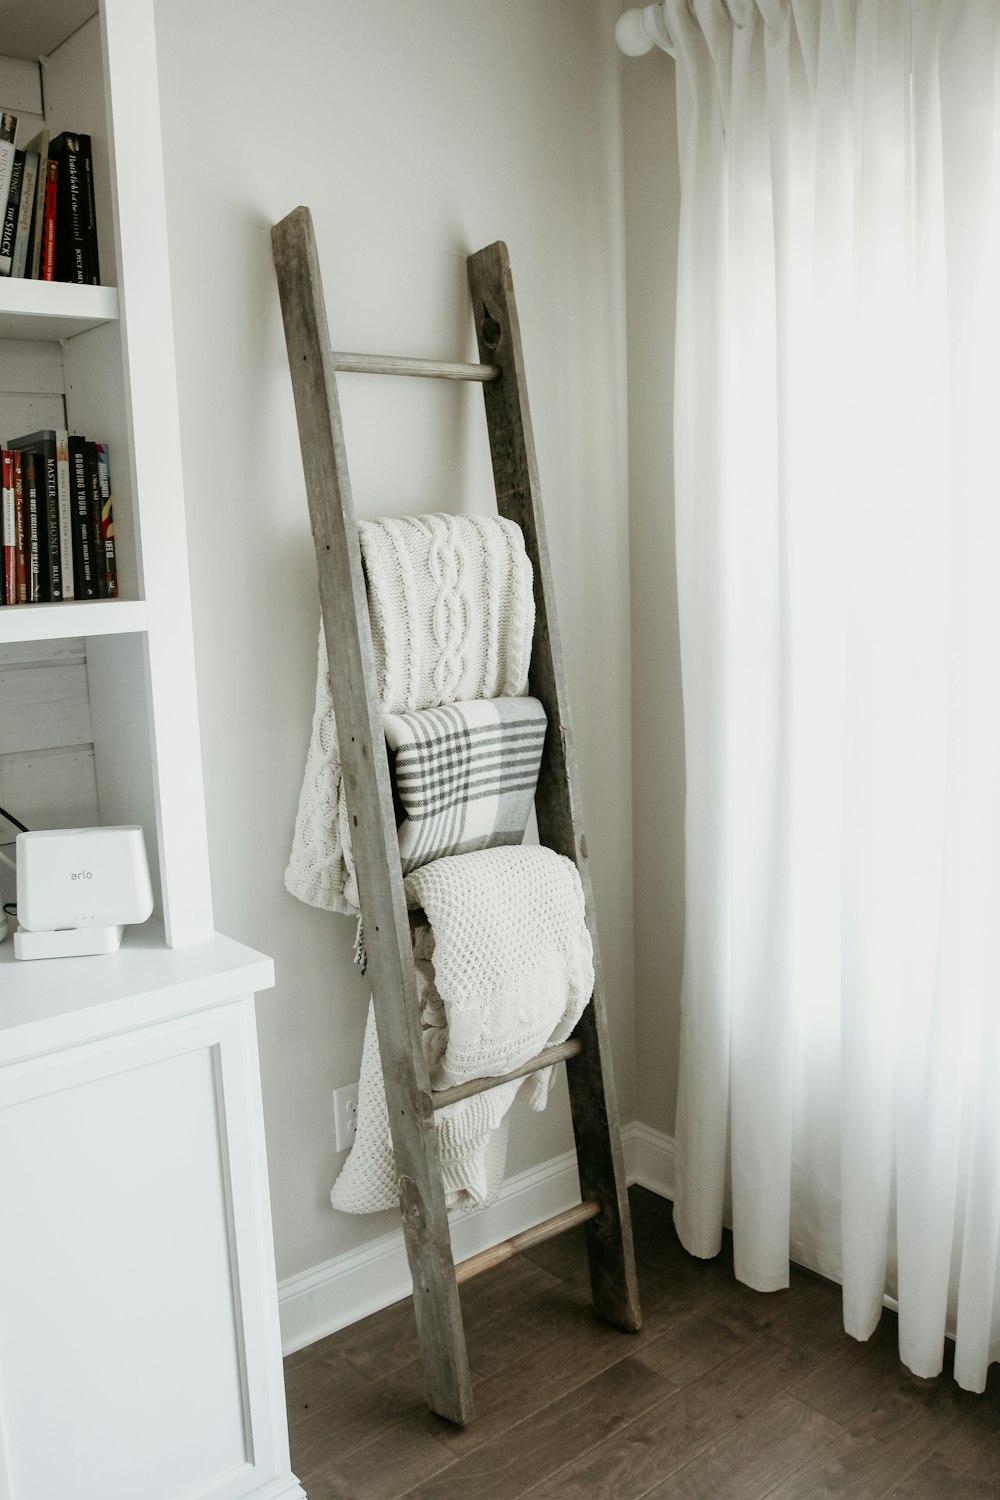 textiles hanging on gray wooden ladder